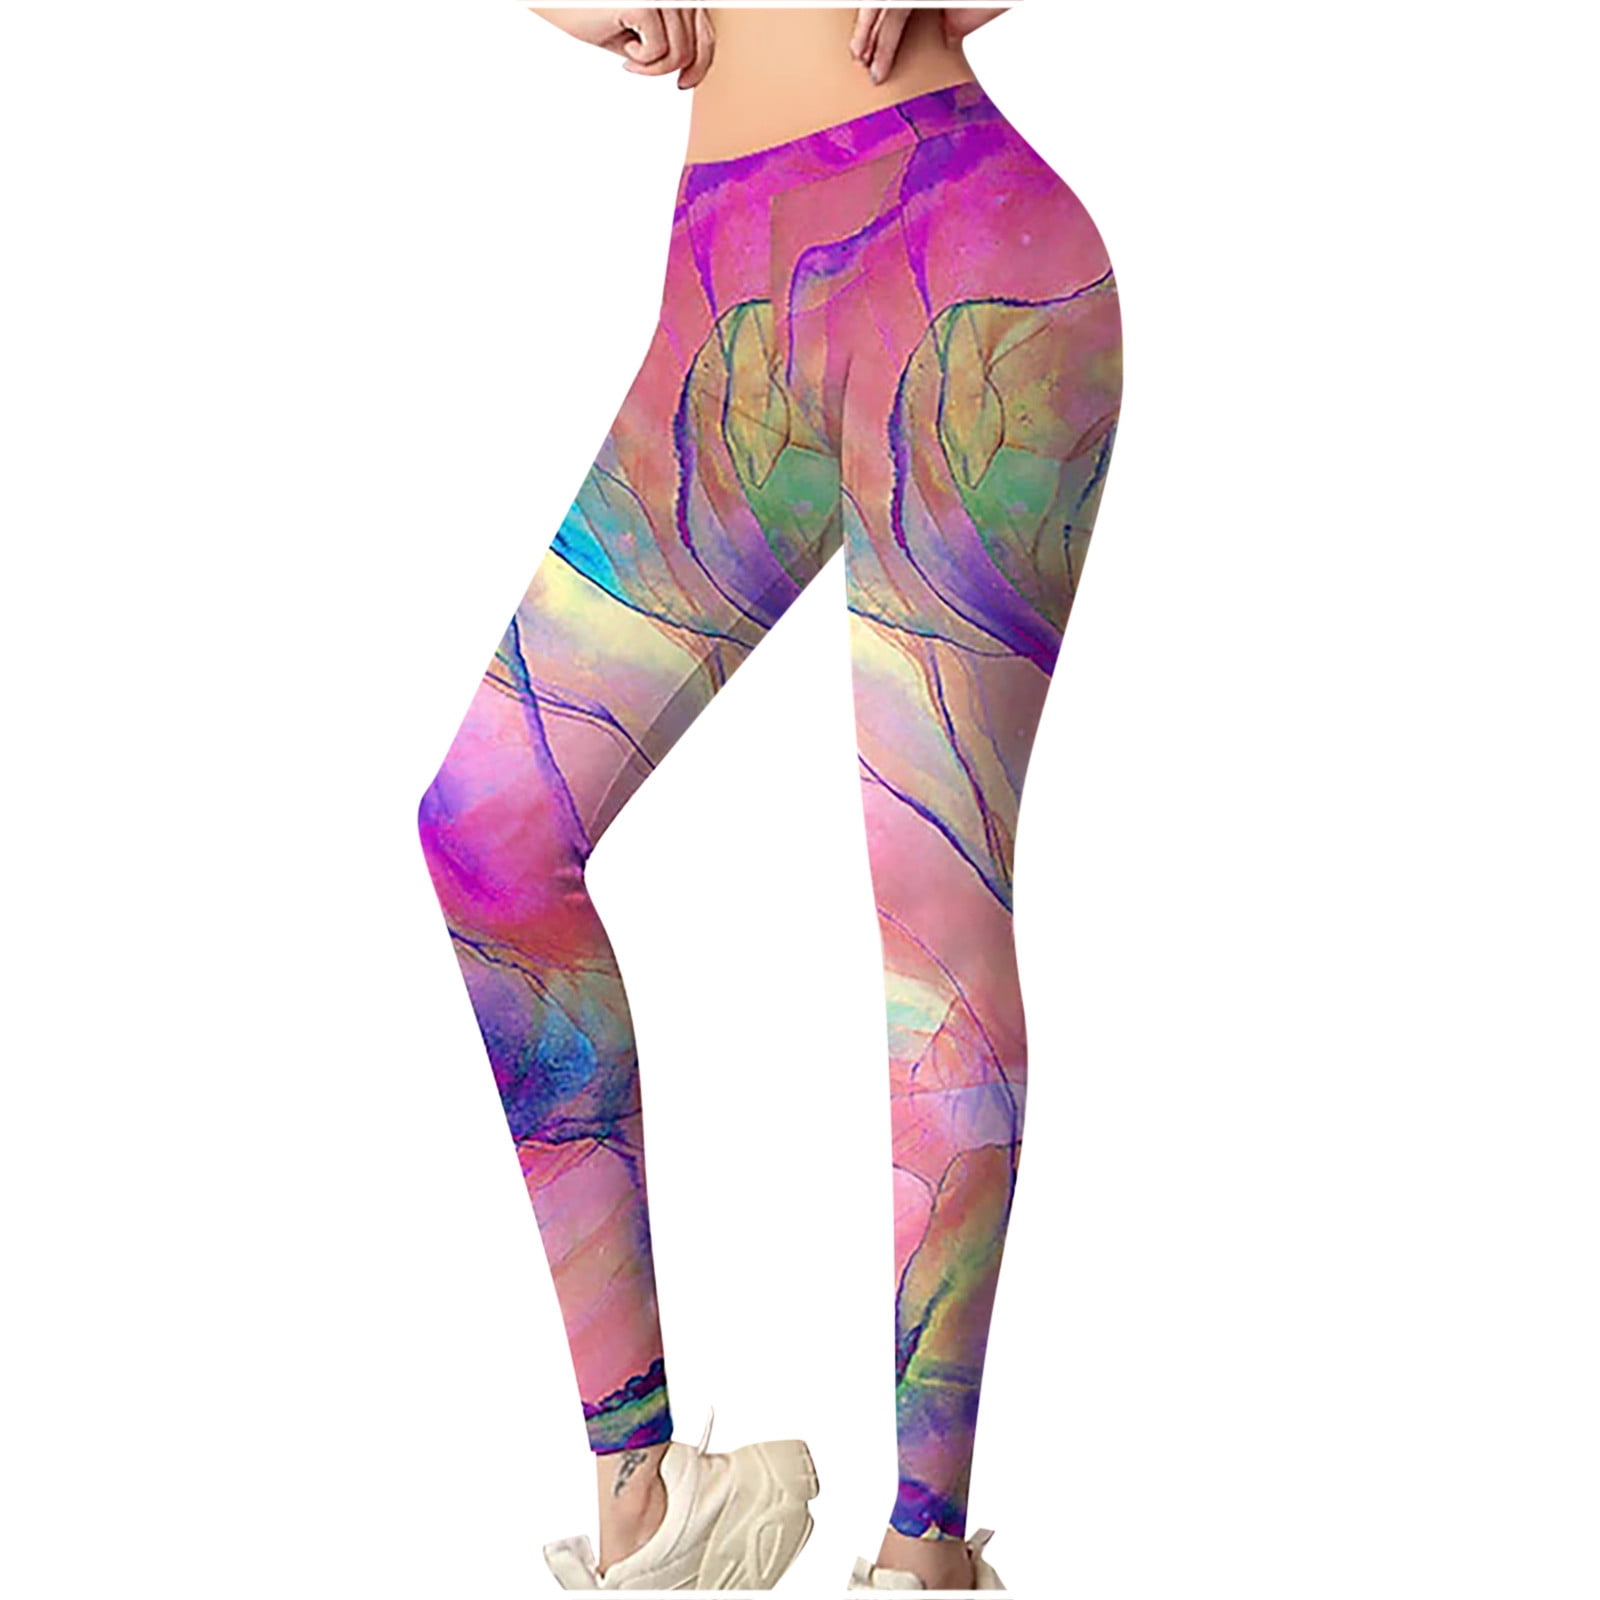 Details about   ❤Women Elasticised High Waist Pants Leggings Fitness Sport Training Trousers US❤ 